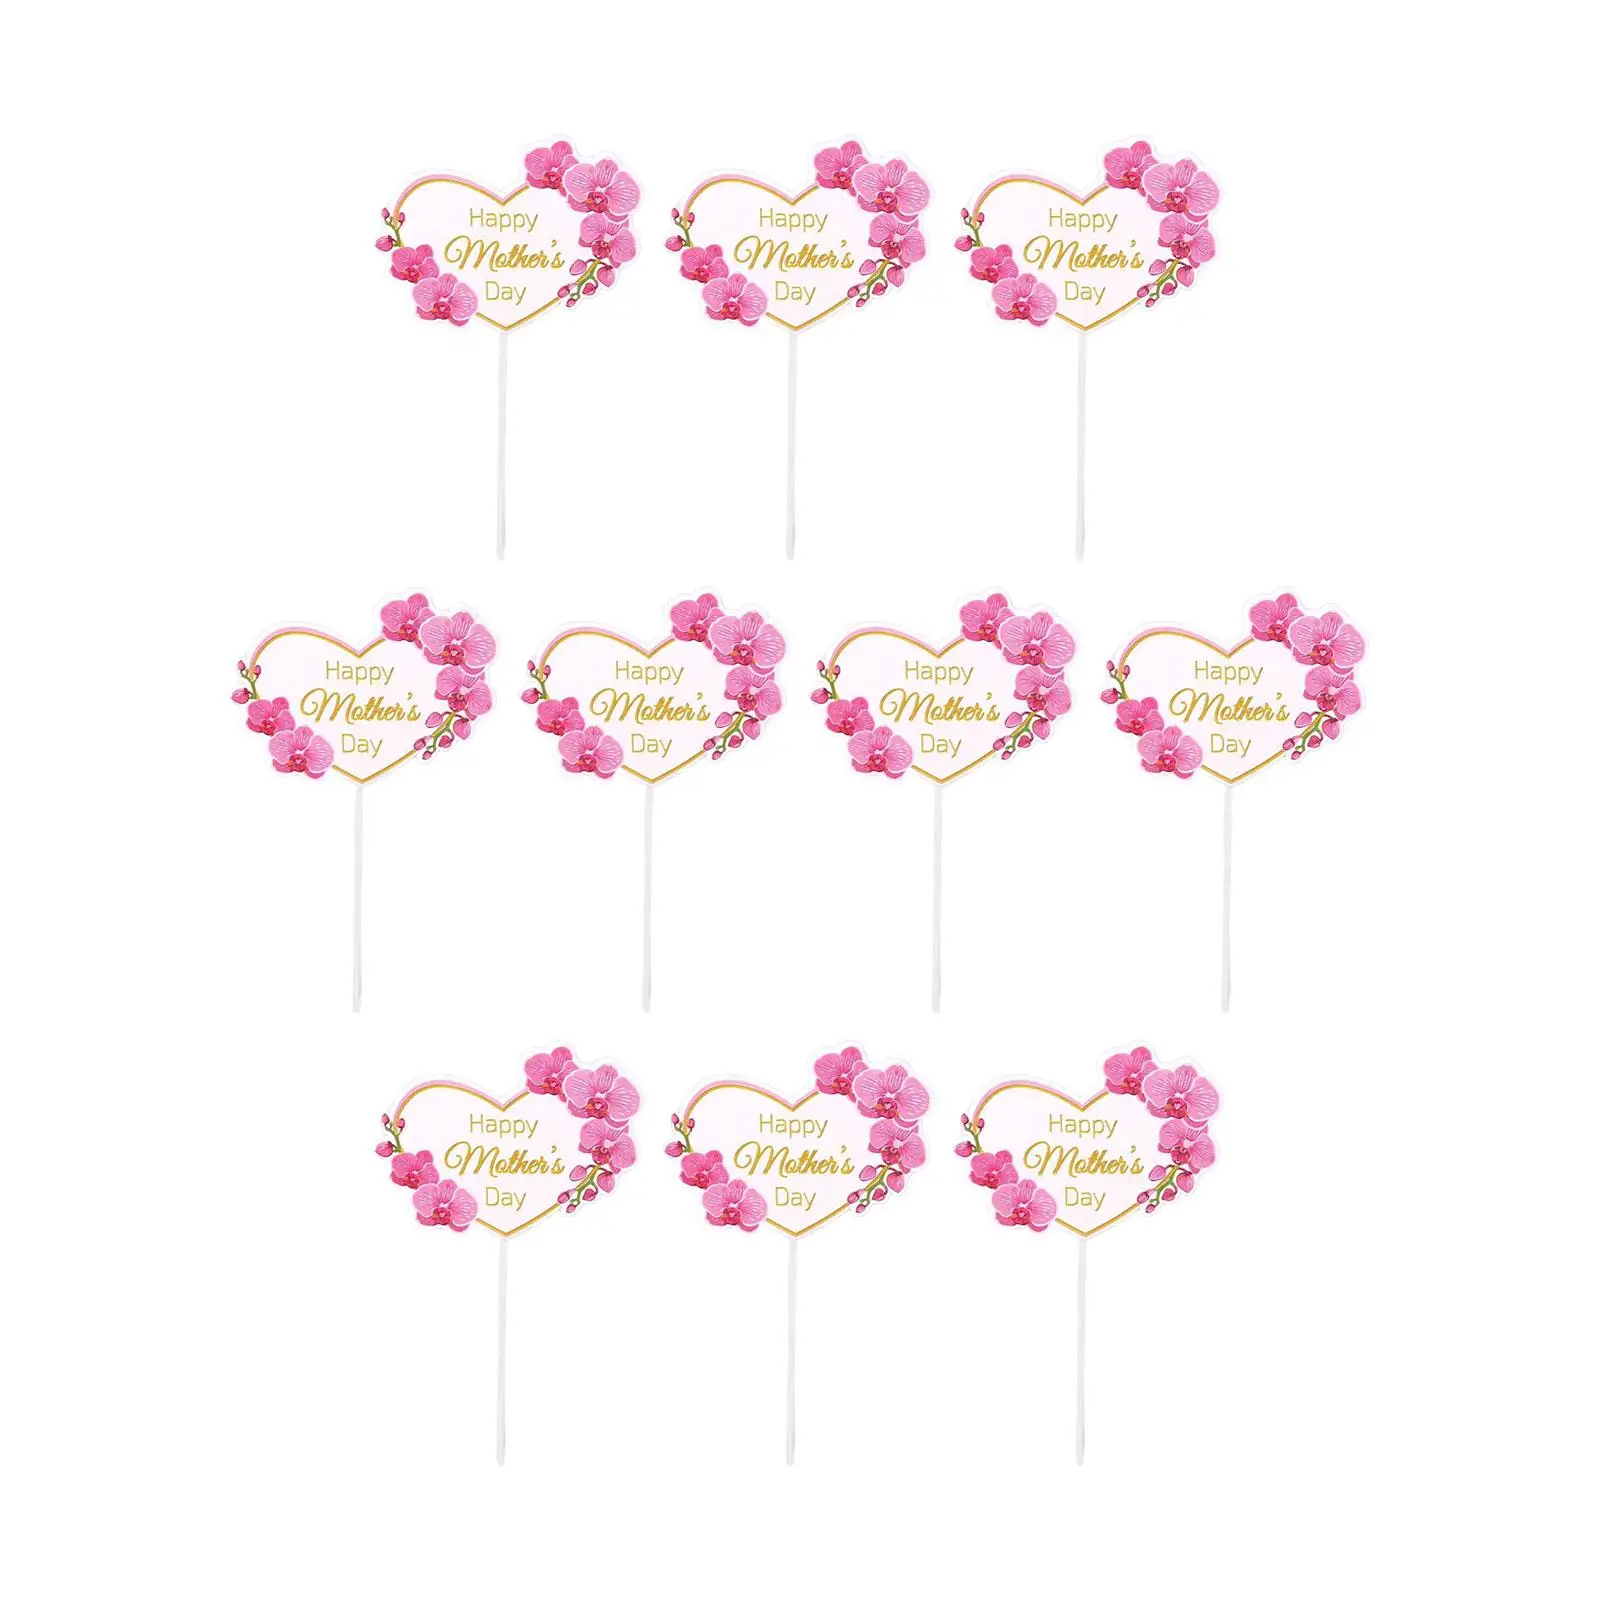 10x Cake Insert Cake Decoration Decorative cake Toppers for Event Cake